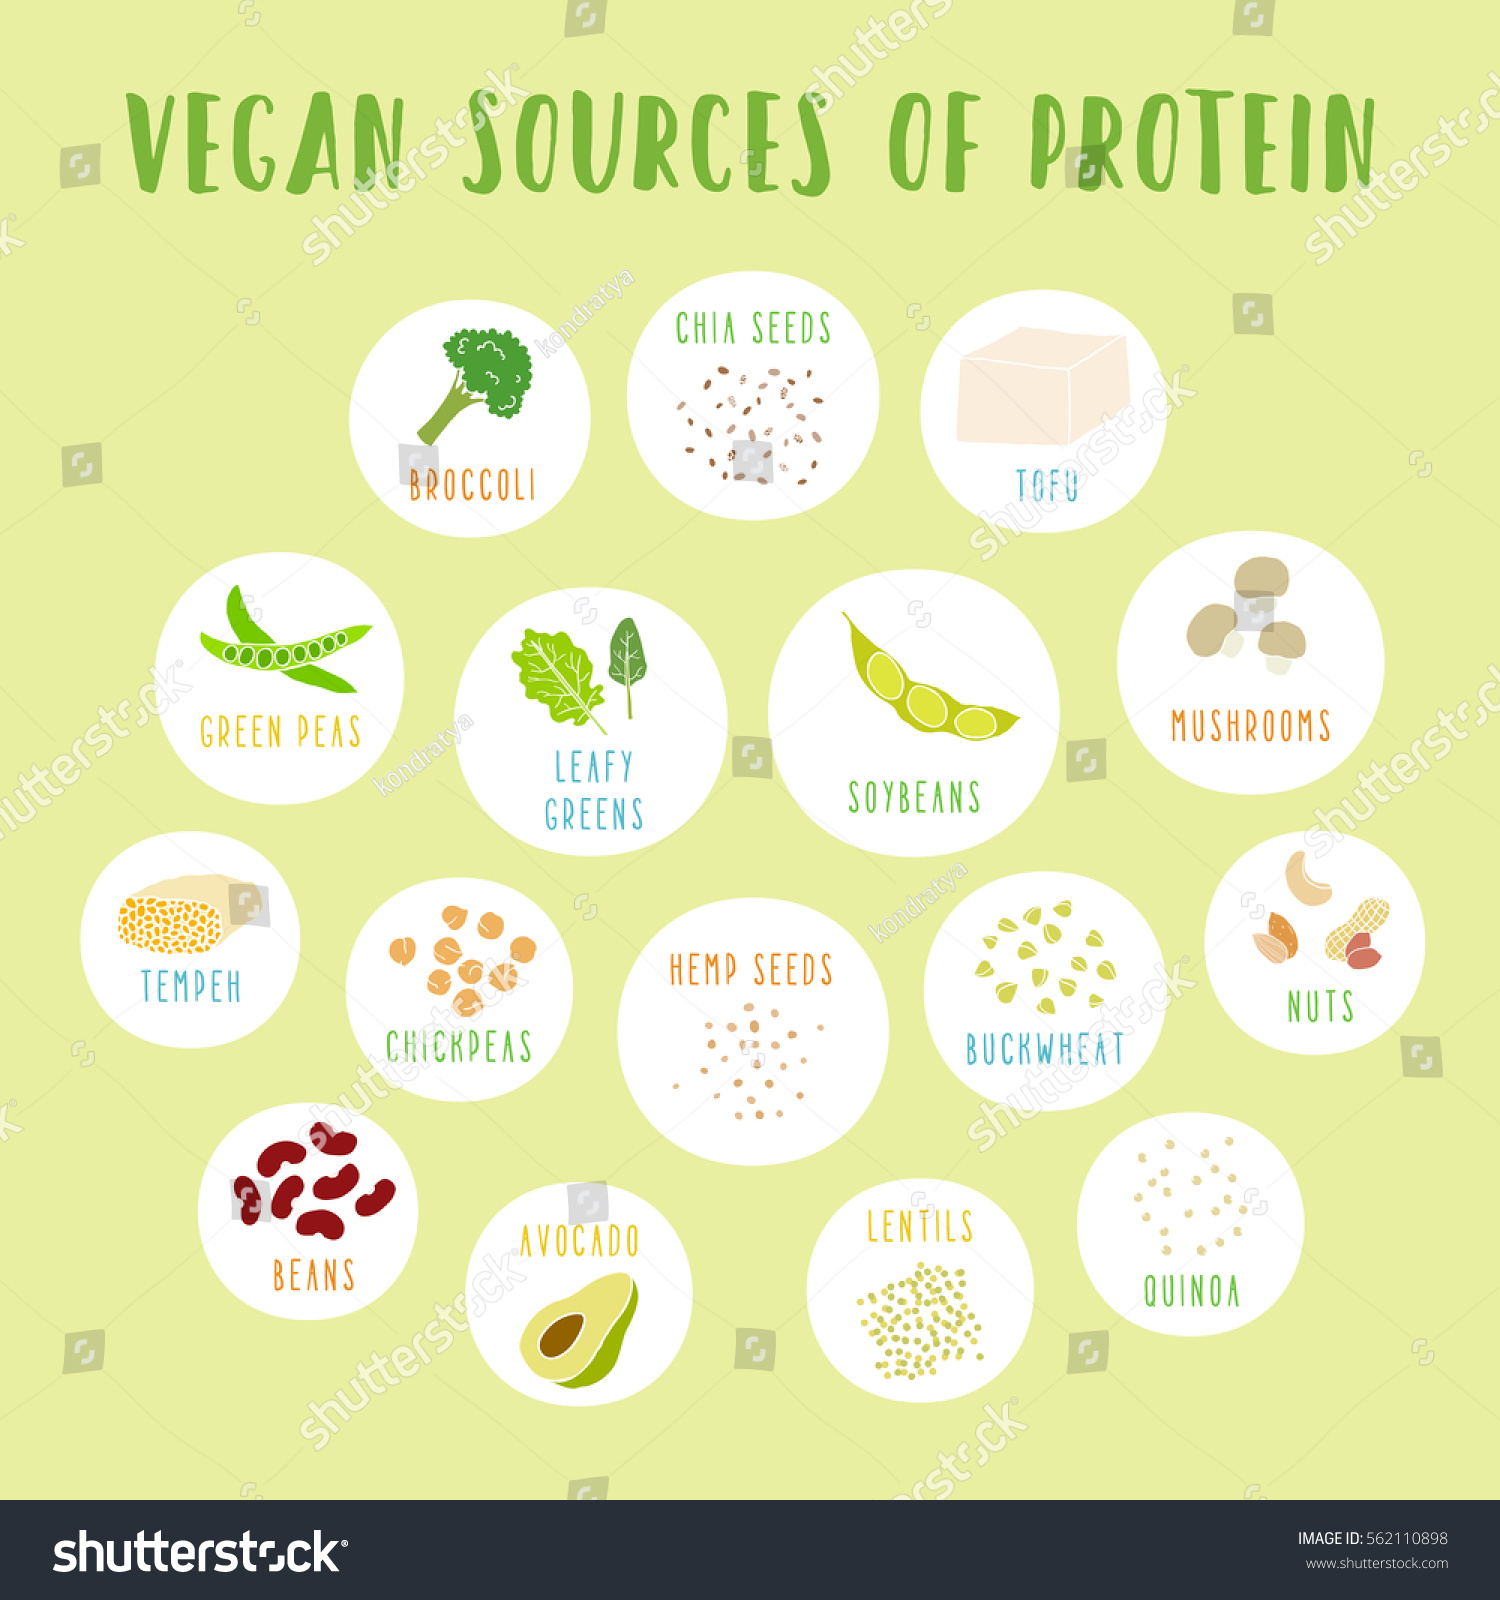 Vegan Sources Protein Vector Info Poster Stock Vector Royalty Free 562110898 8374